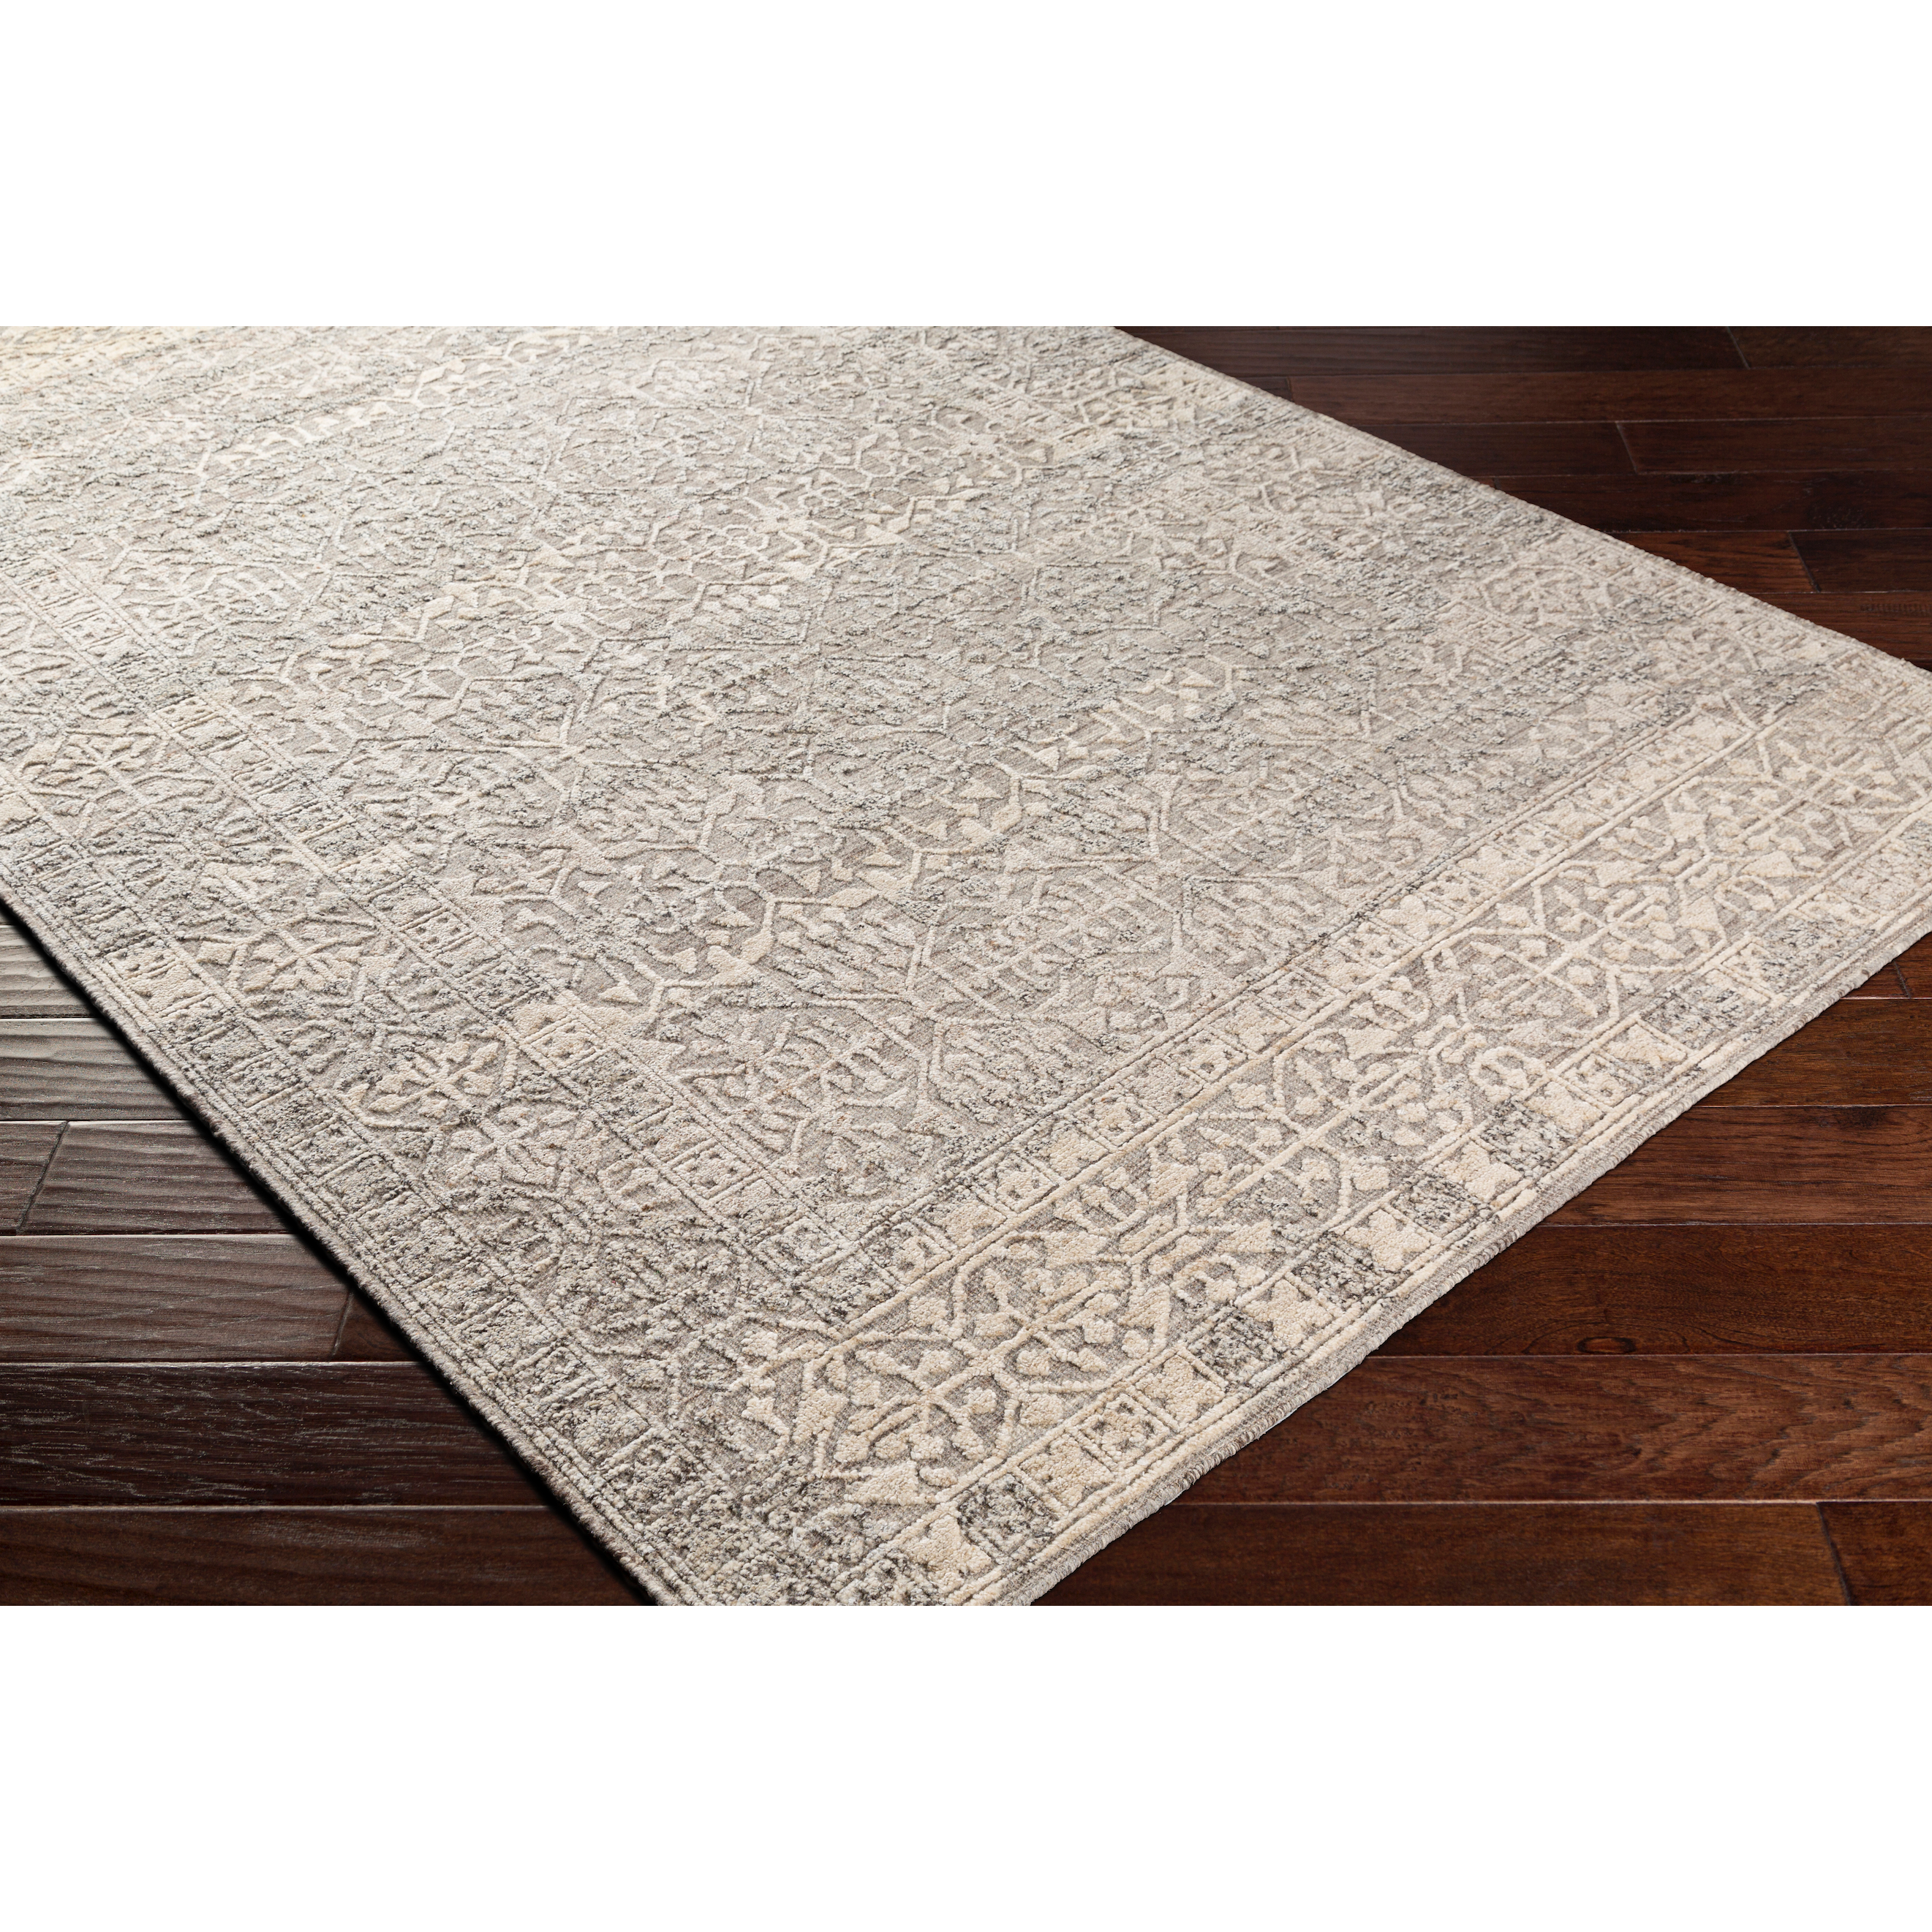 The Tunus Silver Rug features a globally inspired design made from wool. The hand-knotted rug adds wabi sabi charm to any room. Amethyst Home provides interior design, new home construction design consulting, vintage area rugs, and lighting in the Portland metro area.